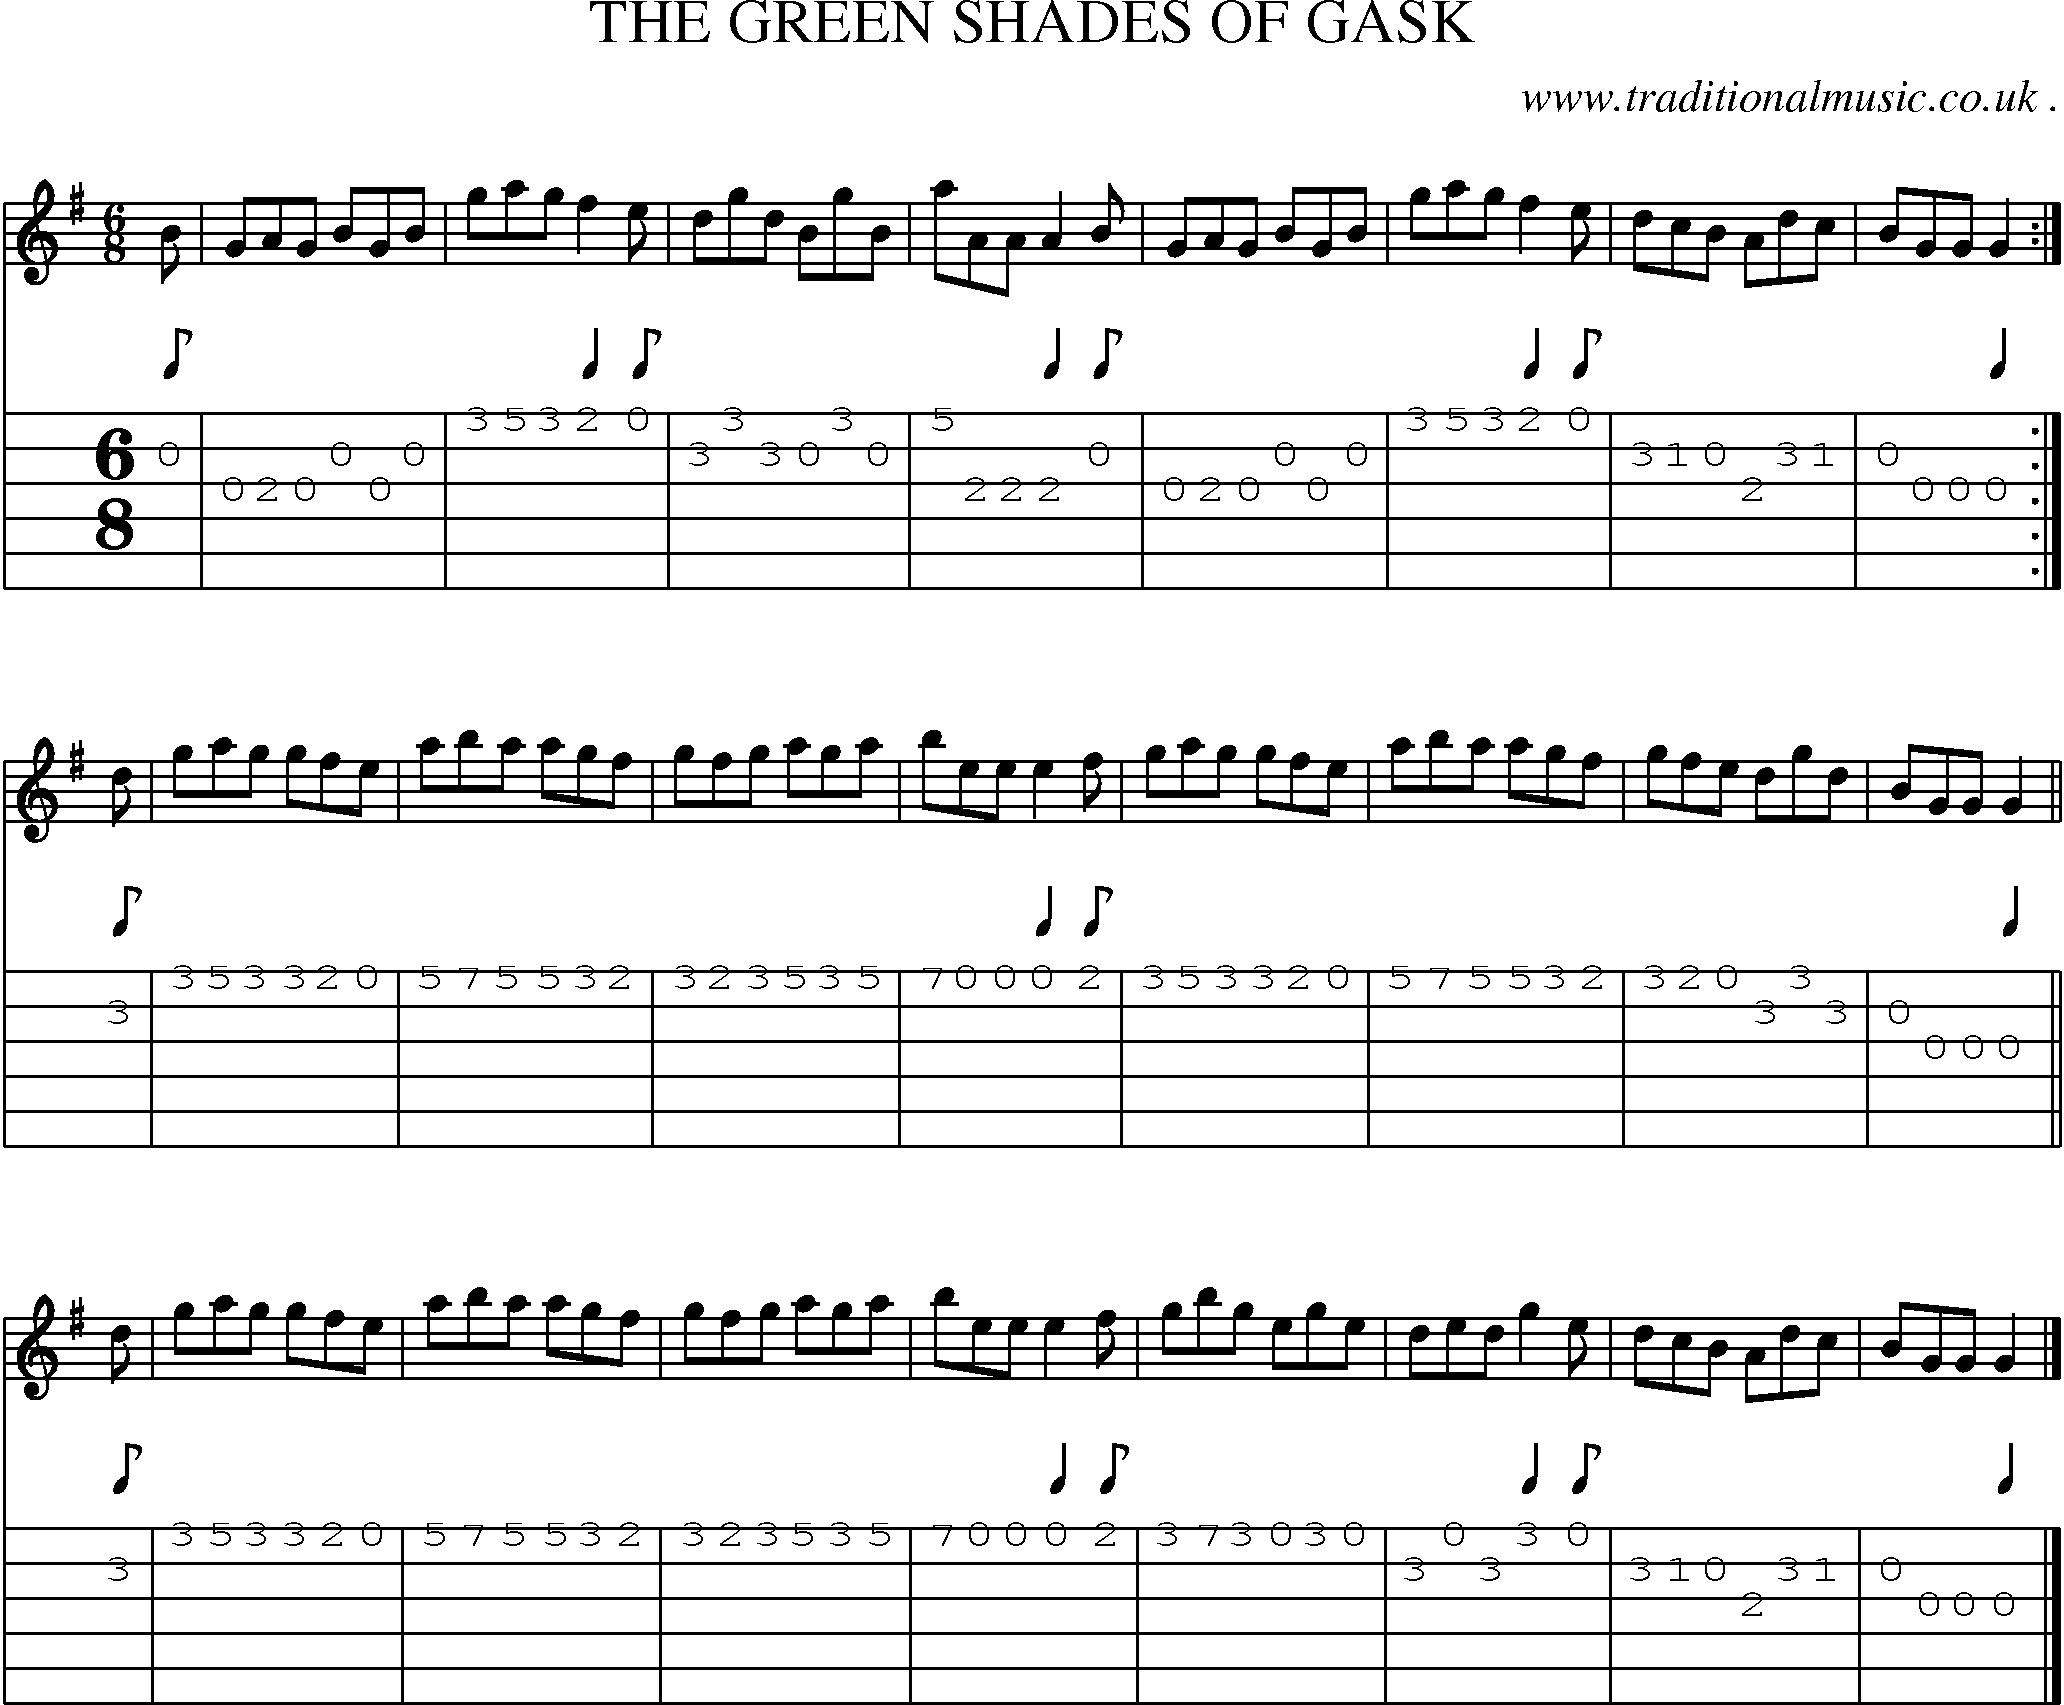 Sheet-music  score, Chords and Guitar Tabs for The Green Shades Of Gask